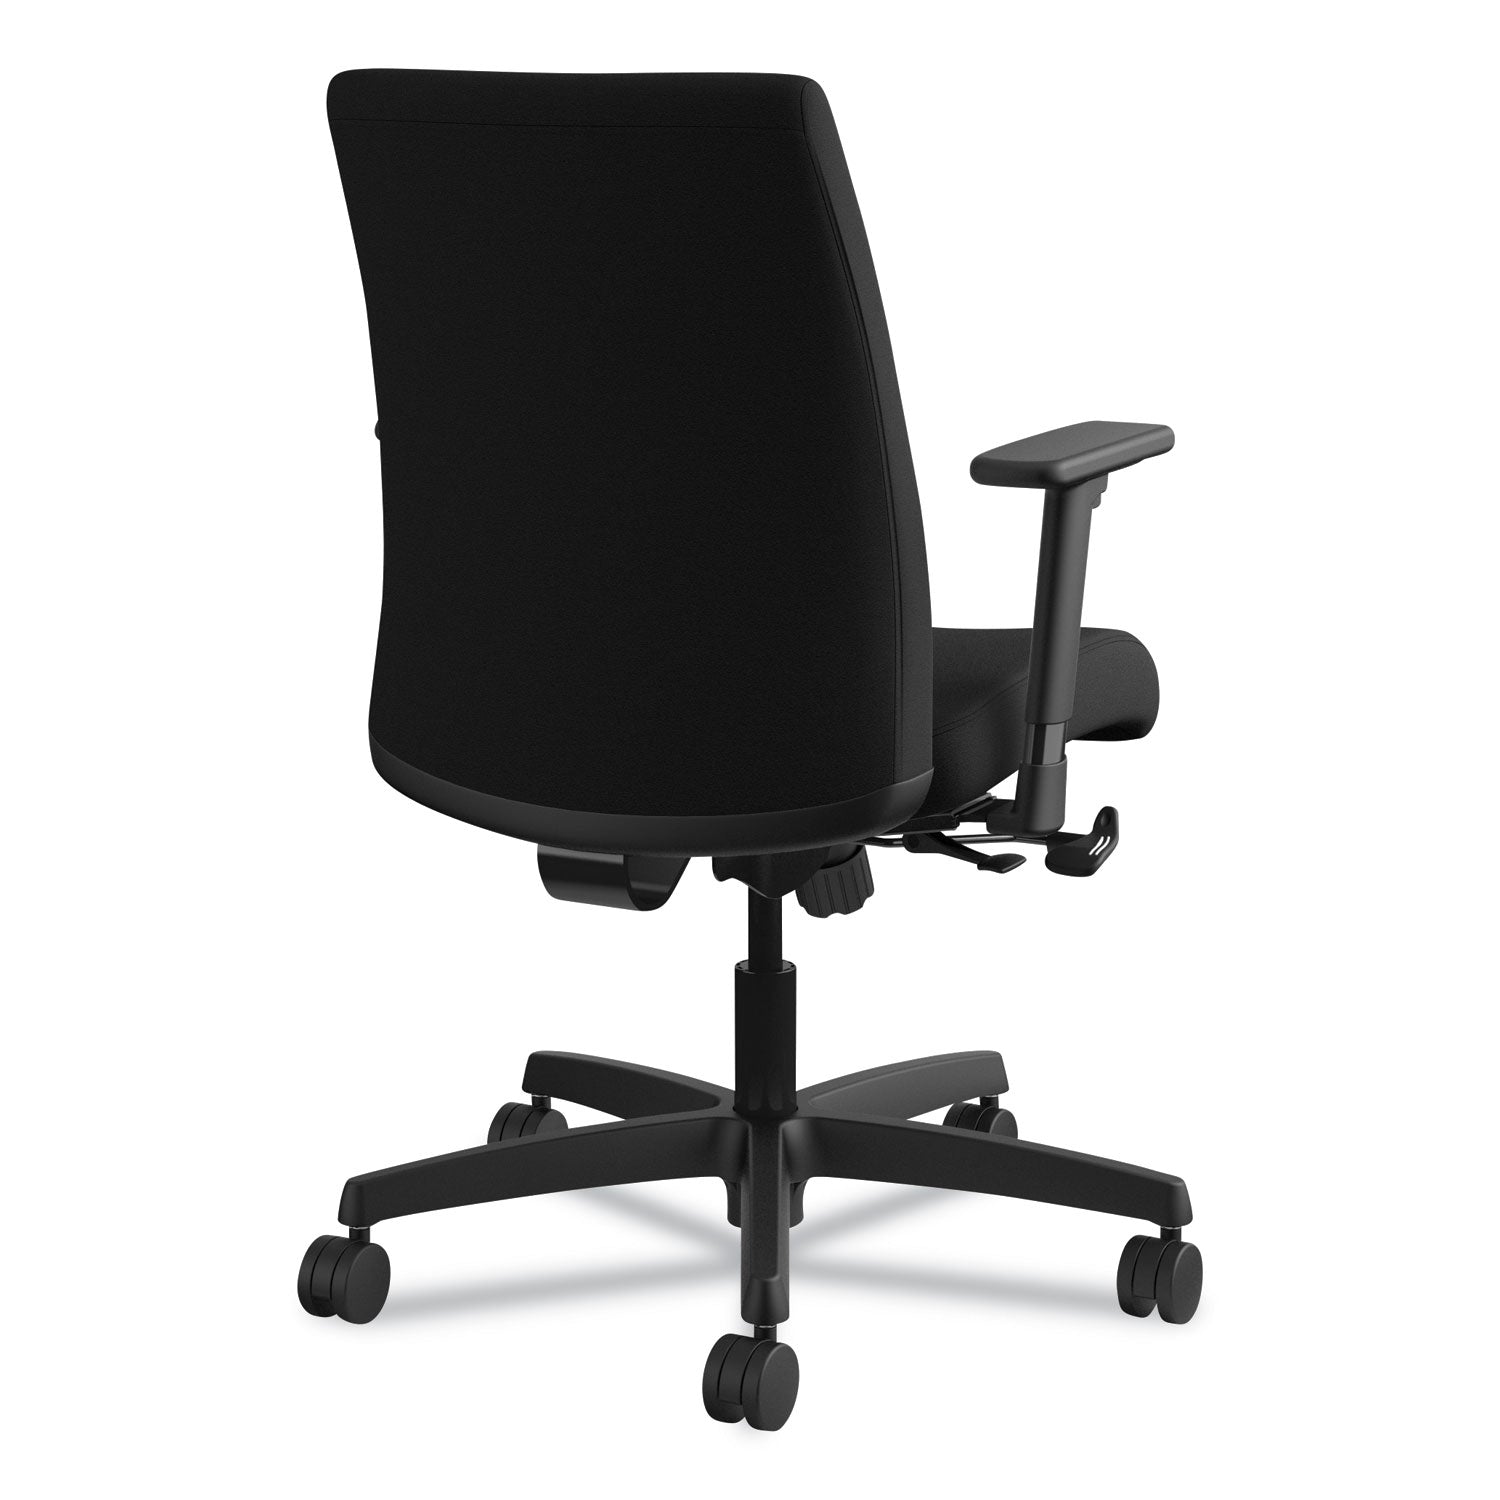 ignition-series-fabric-low-back-task-chair-supports-up-to-300-lb-17-to-215-seat-height-black_honit105cu10 - 6